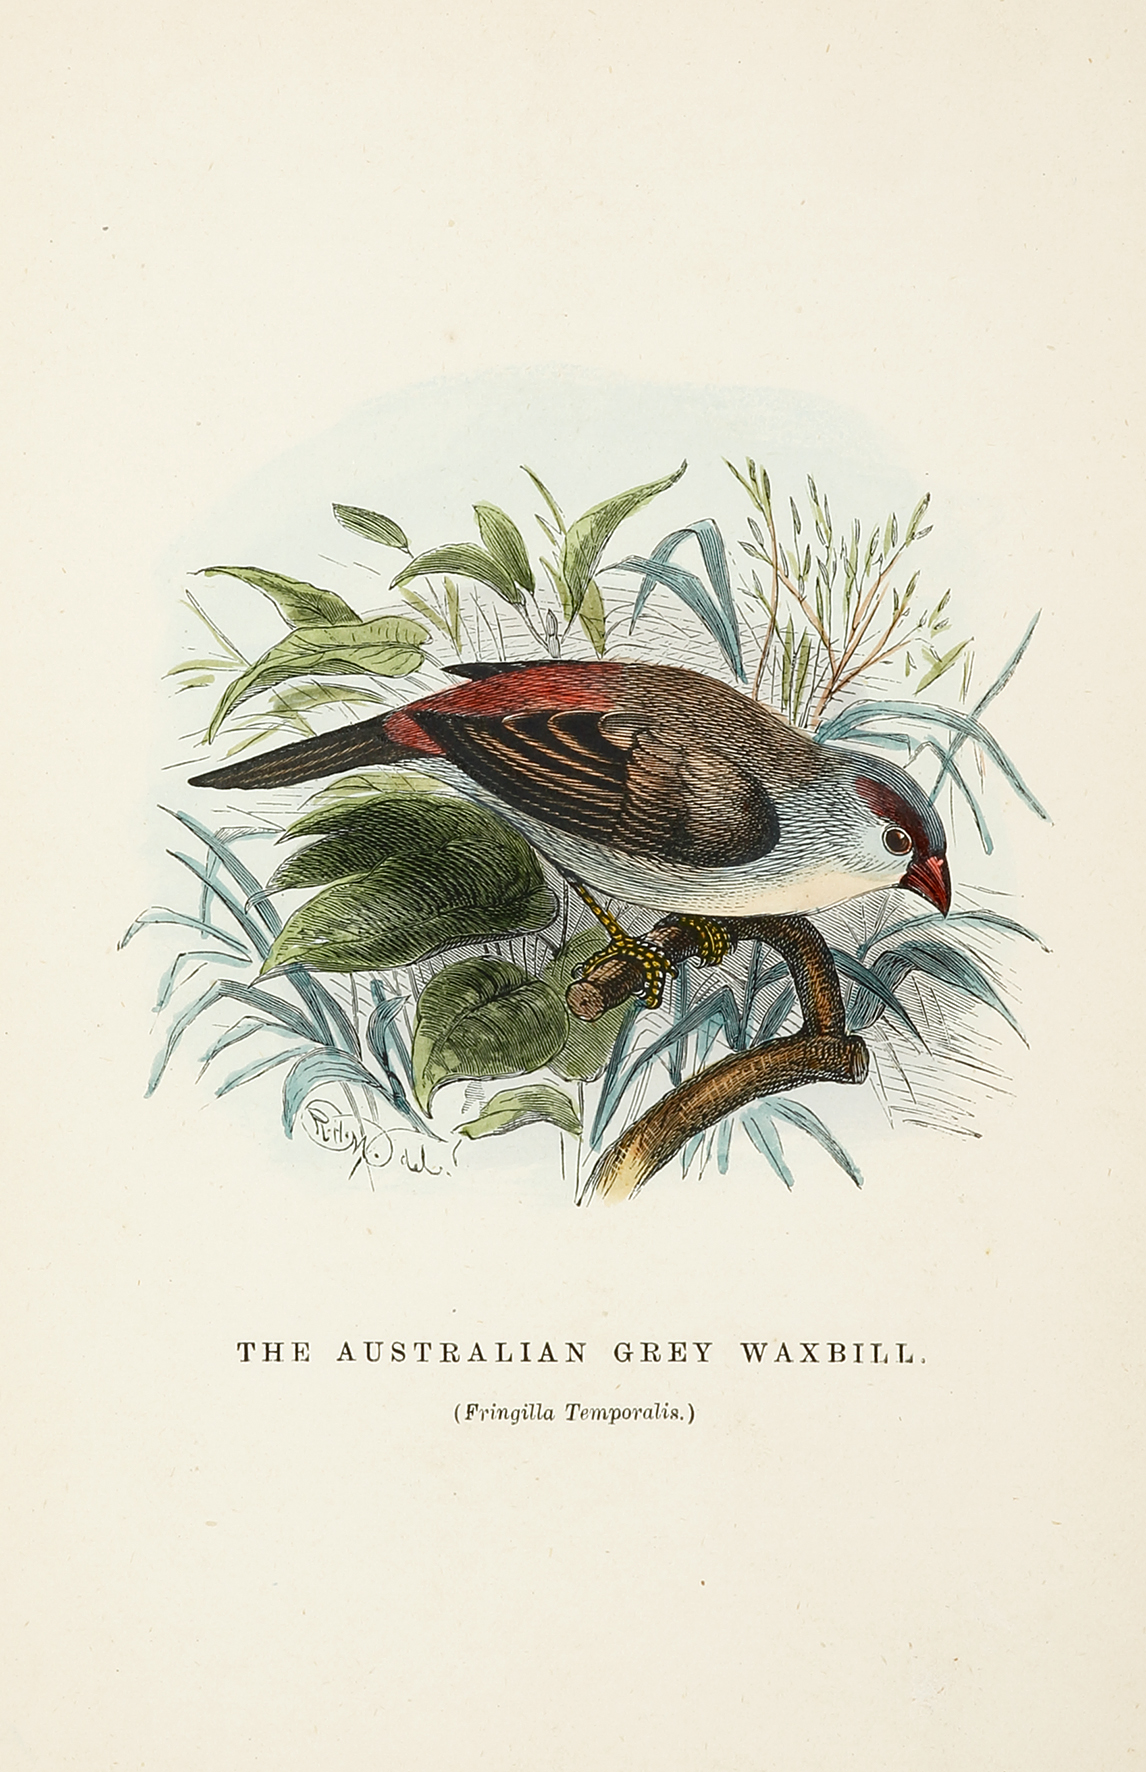 The Australian Grey Waxbill. (Fringilla Temporalis.) [Red-browed finch] - Antique Print from 1884